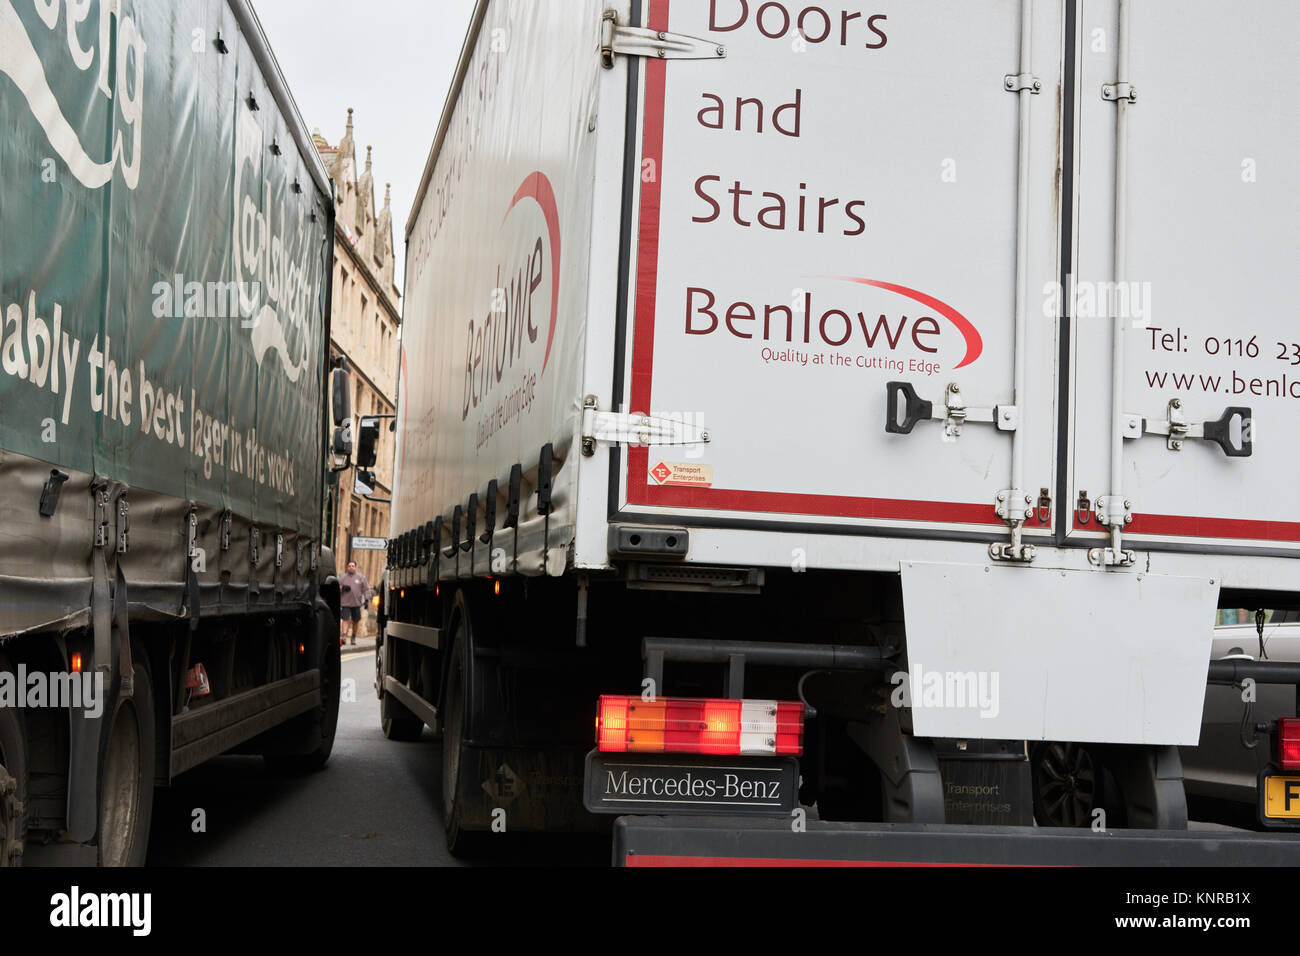 Narrow squeeze as a lorry attempts to pass between a parked lorry and cars along New Street in the country town of Oundle, Northamptonshire, England. Stock Photo